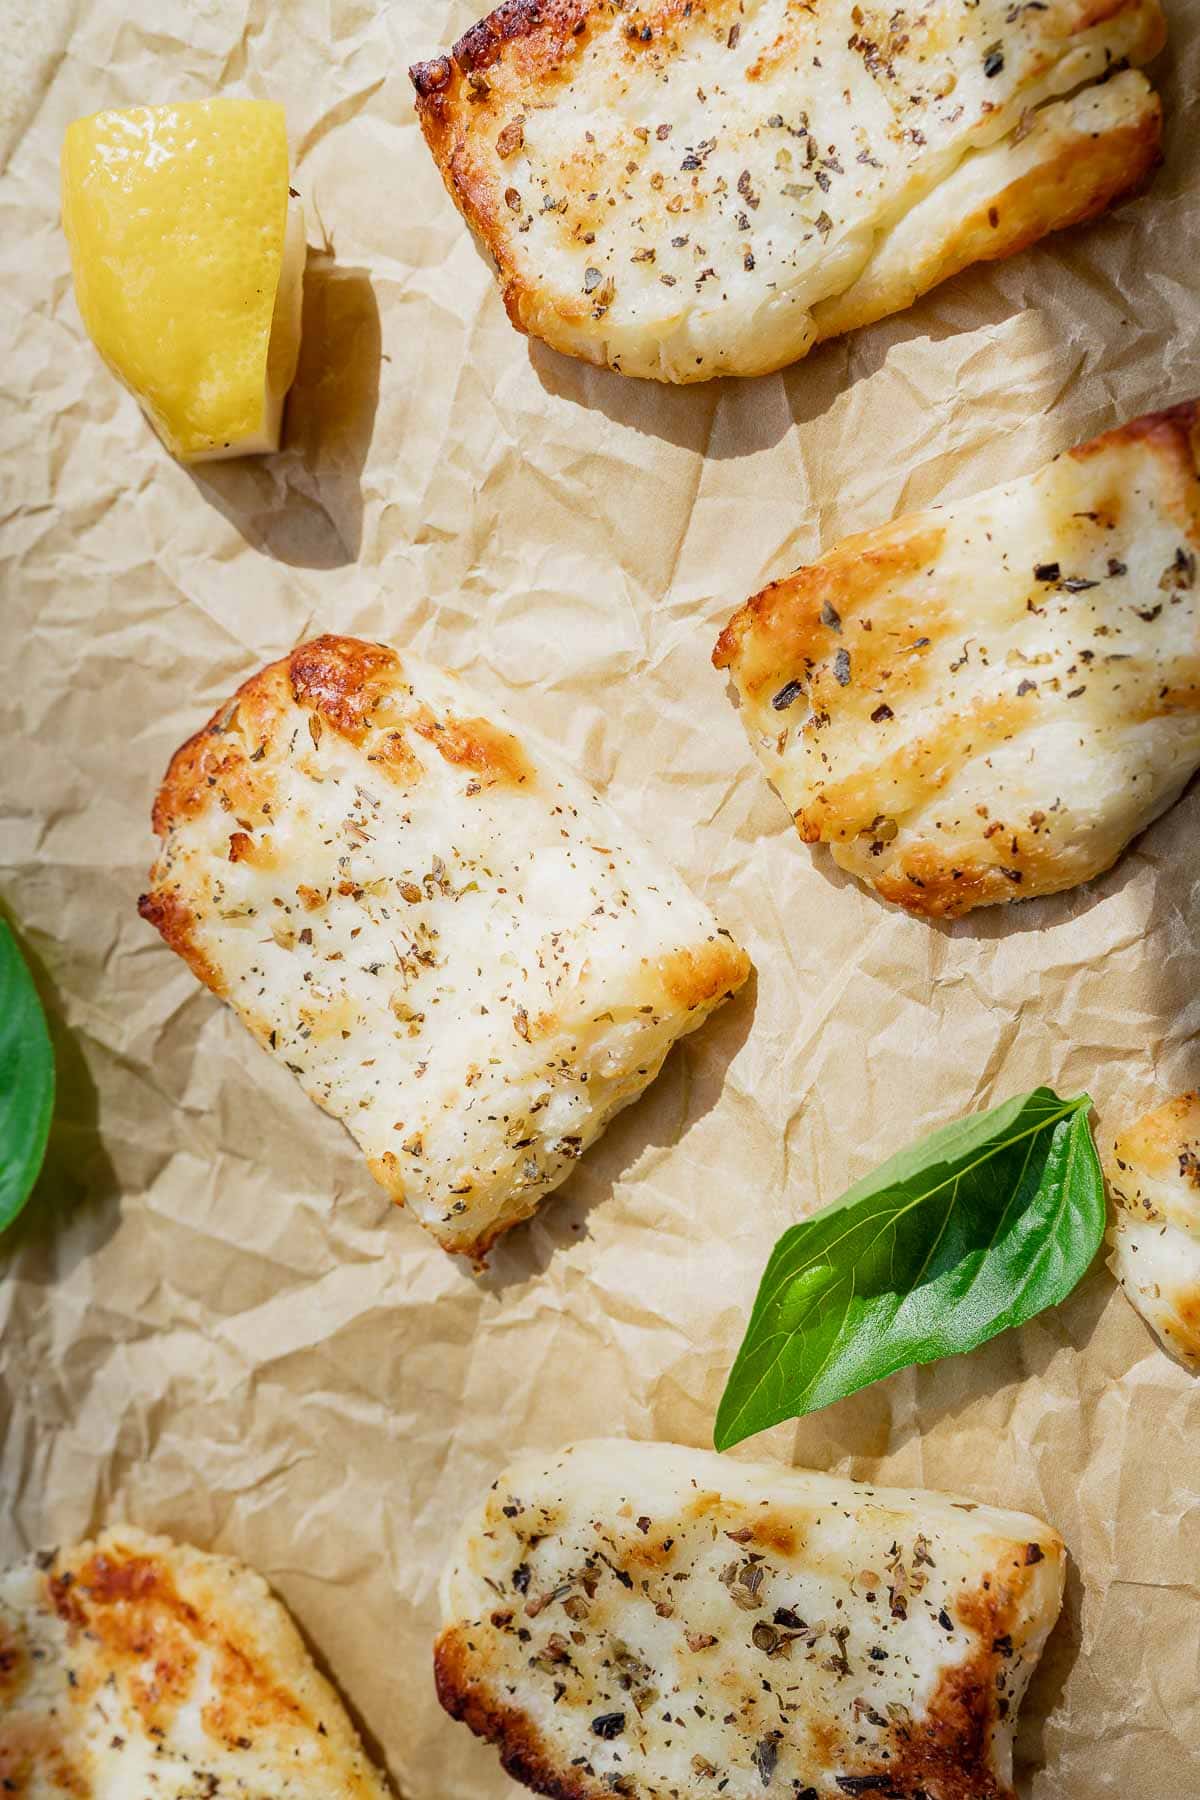 Sunlight hits slices of halloumi cheese resting on wrinkled parchment paper.